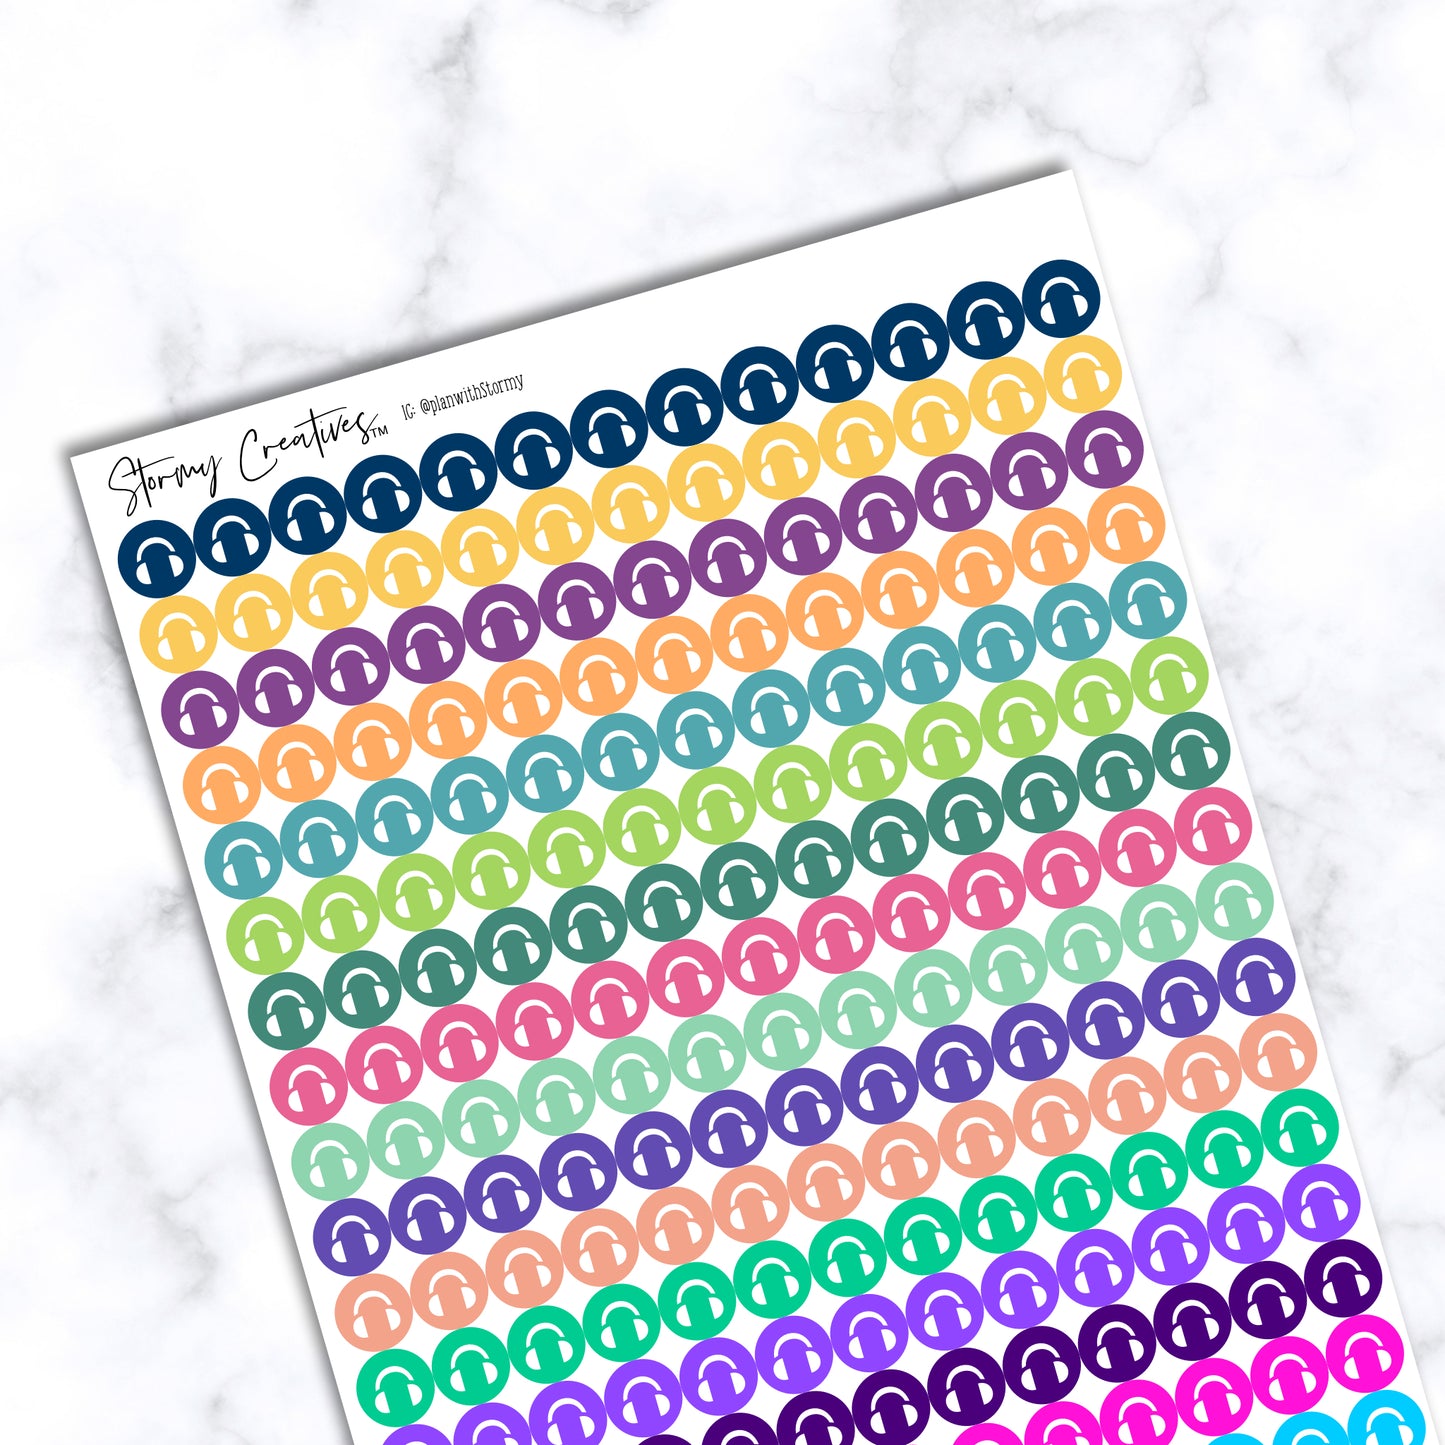 Small Headphone Icon Dot Stickers, 260 Stickers per sheet